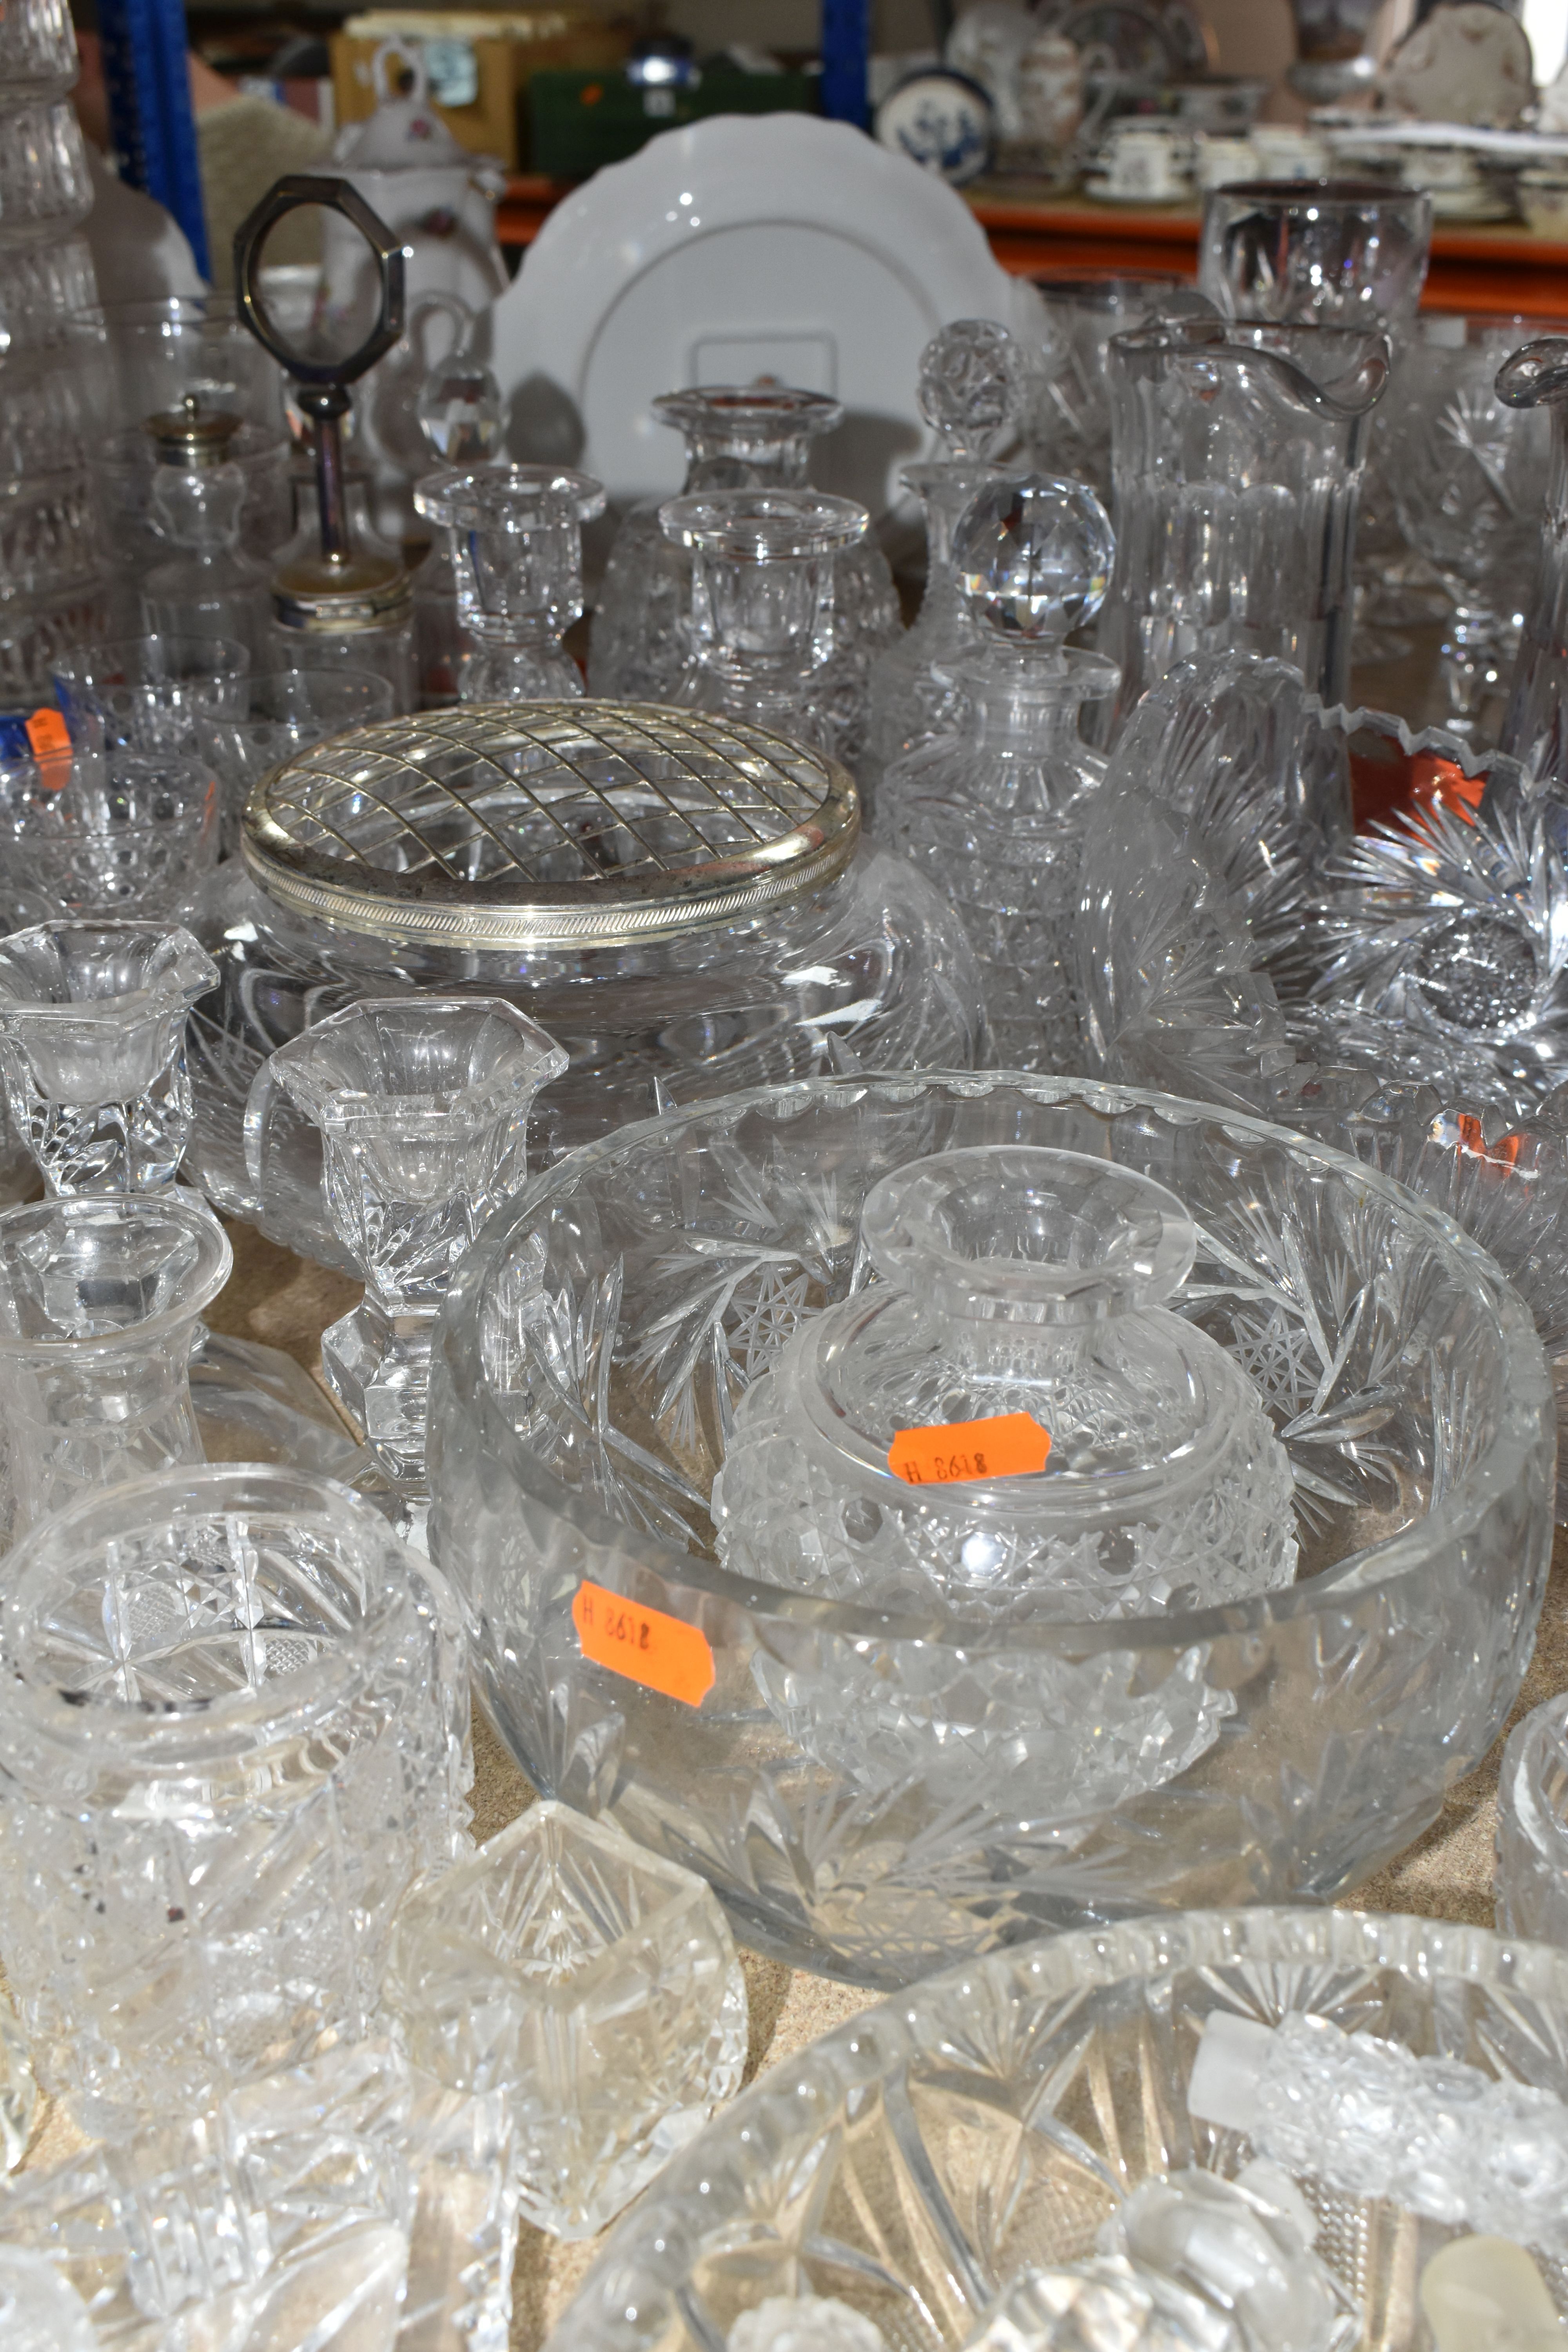 A LARGE VARIETY OF CRYSTAL CUT CLASS DECORATIVE WEAR including six 'Bohemian Crystal' glasses in - Image 8 of 9